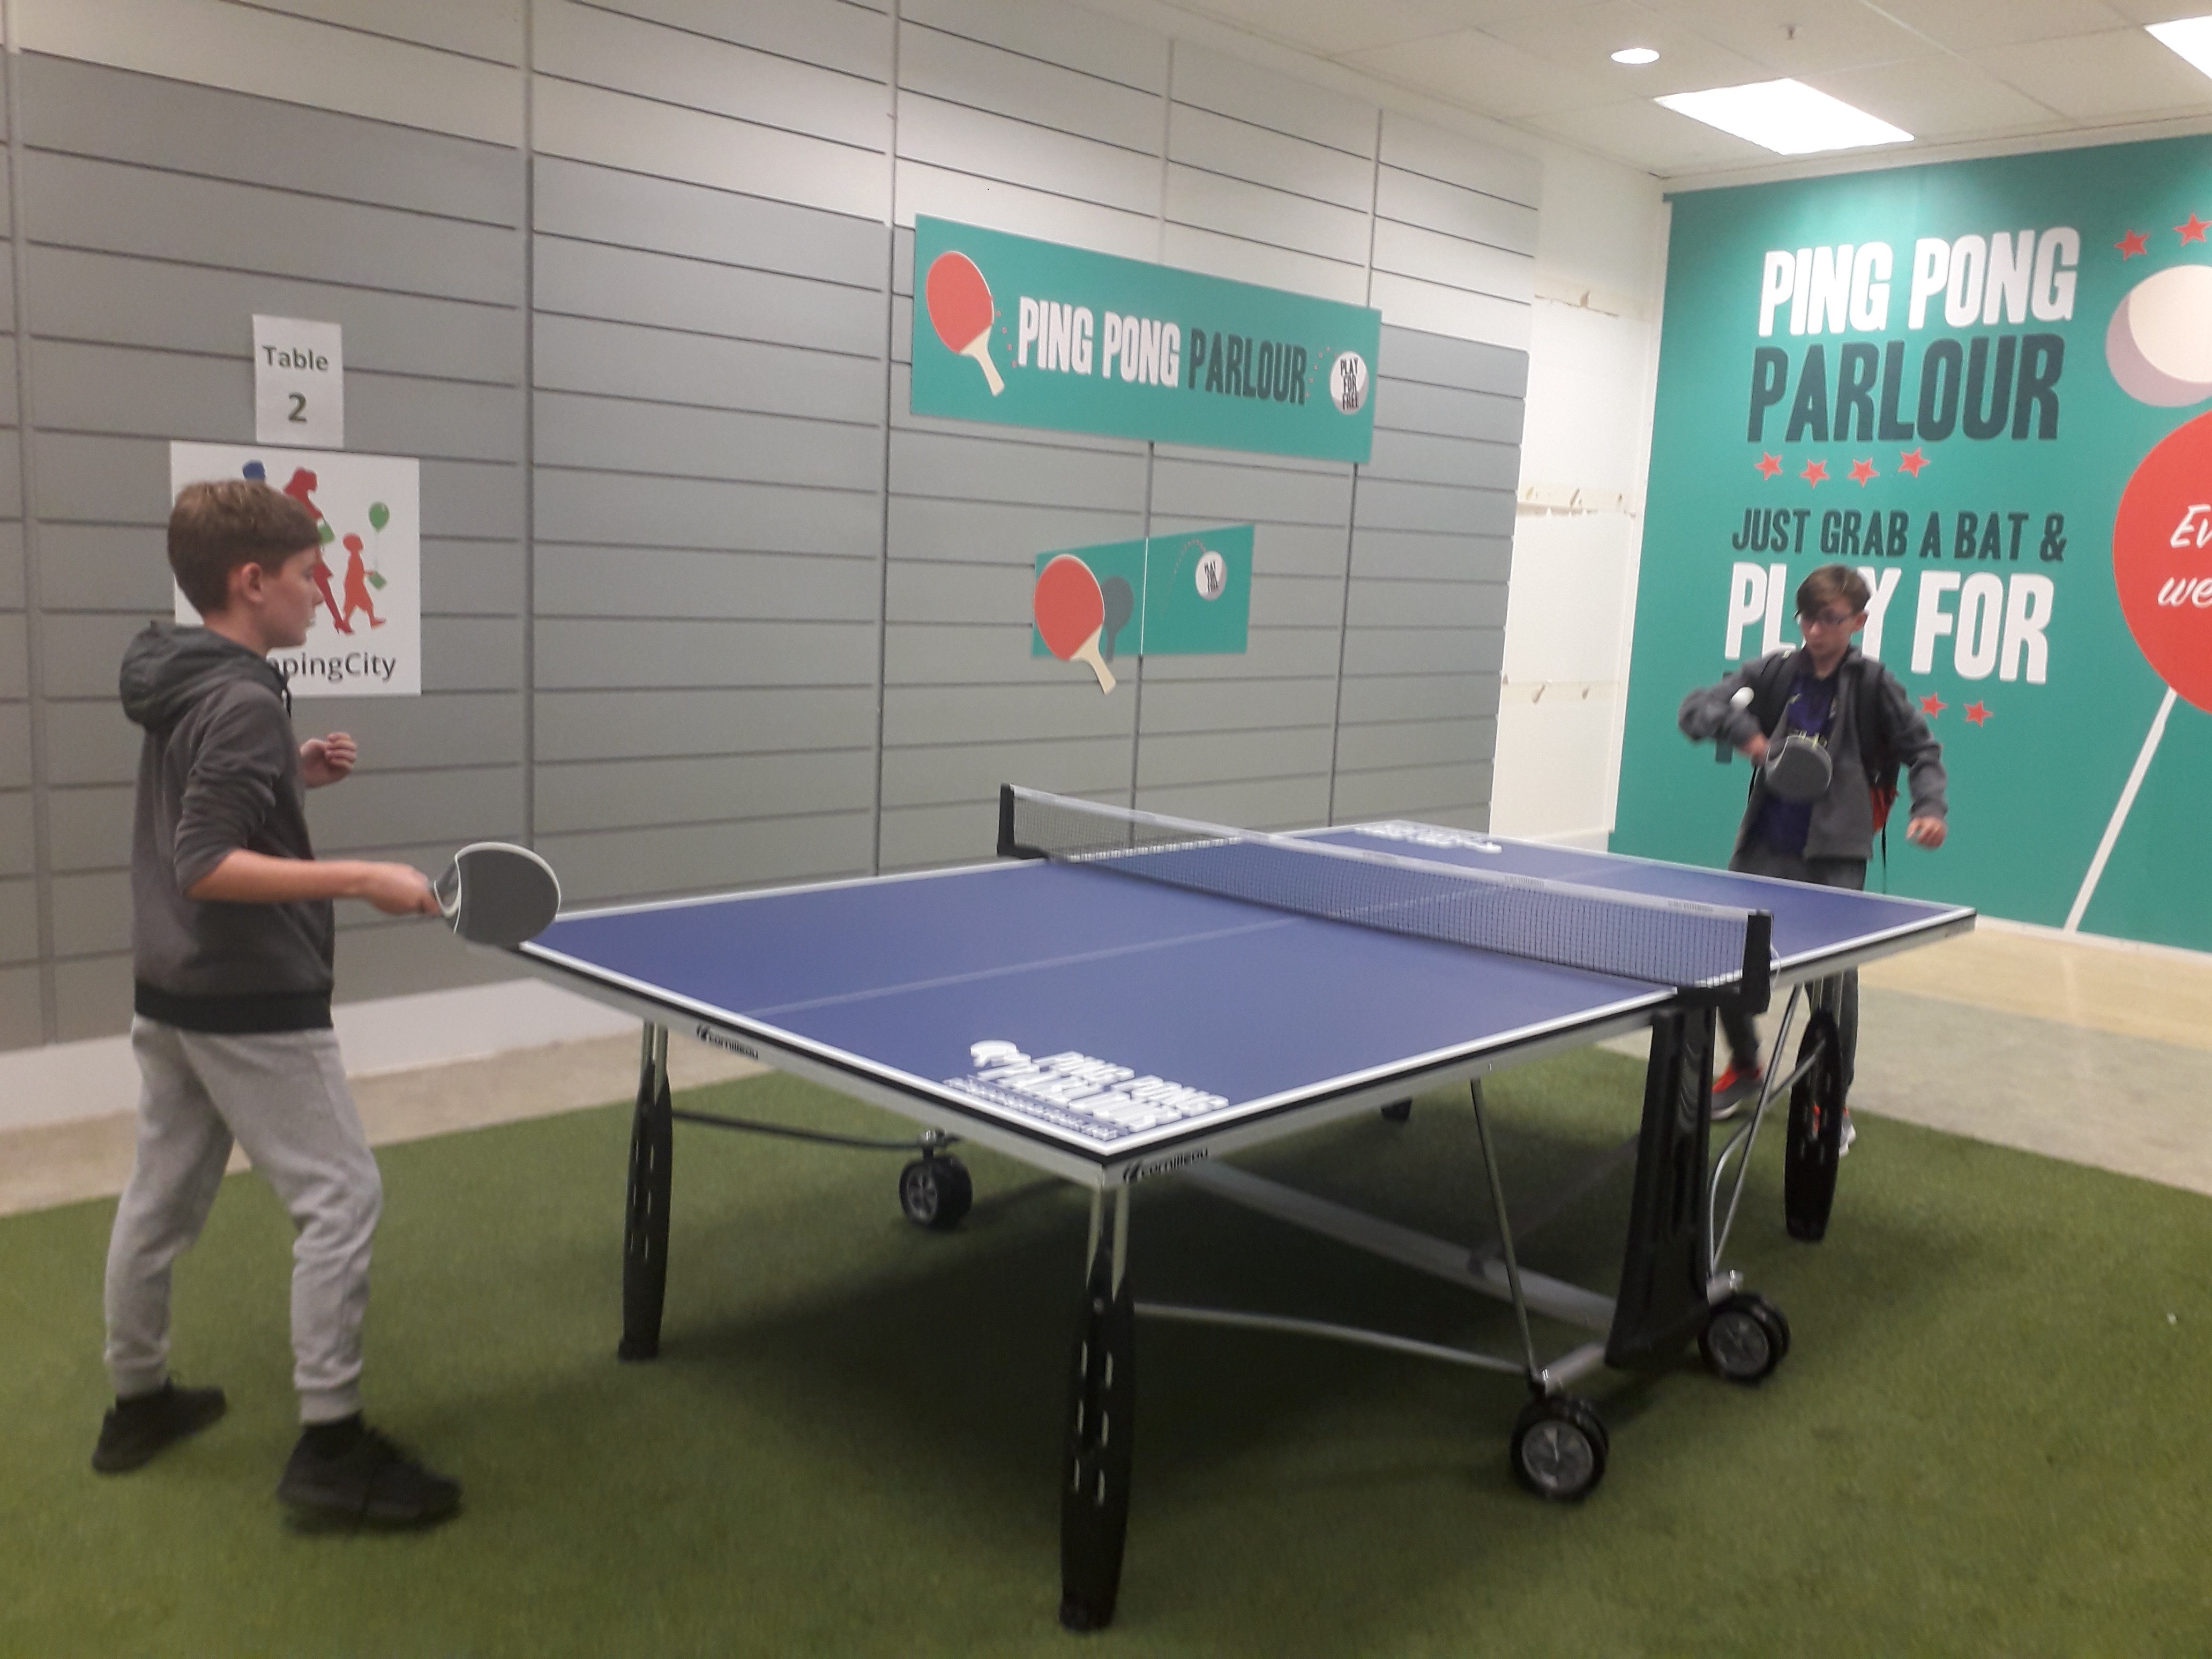 Pop up ping pong parlour!